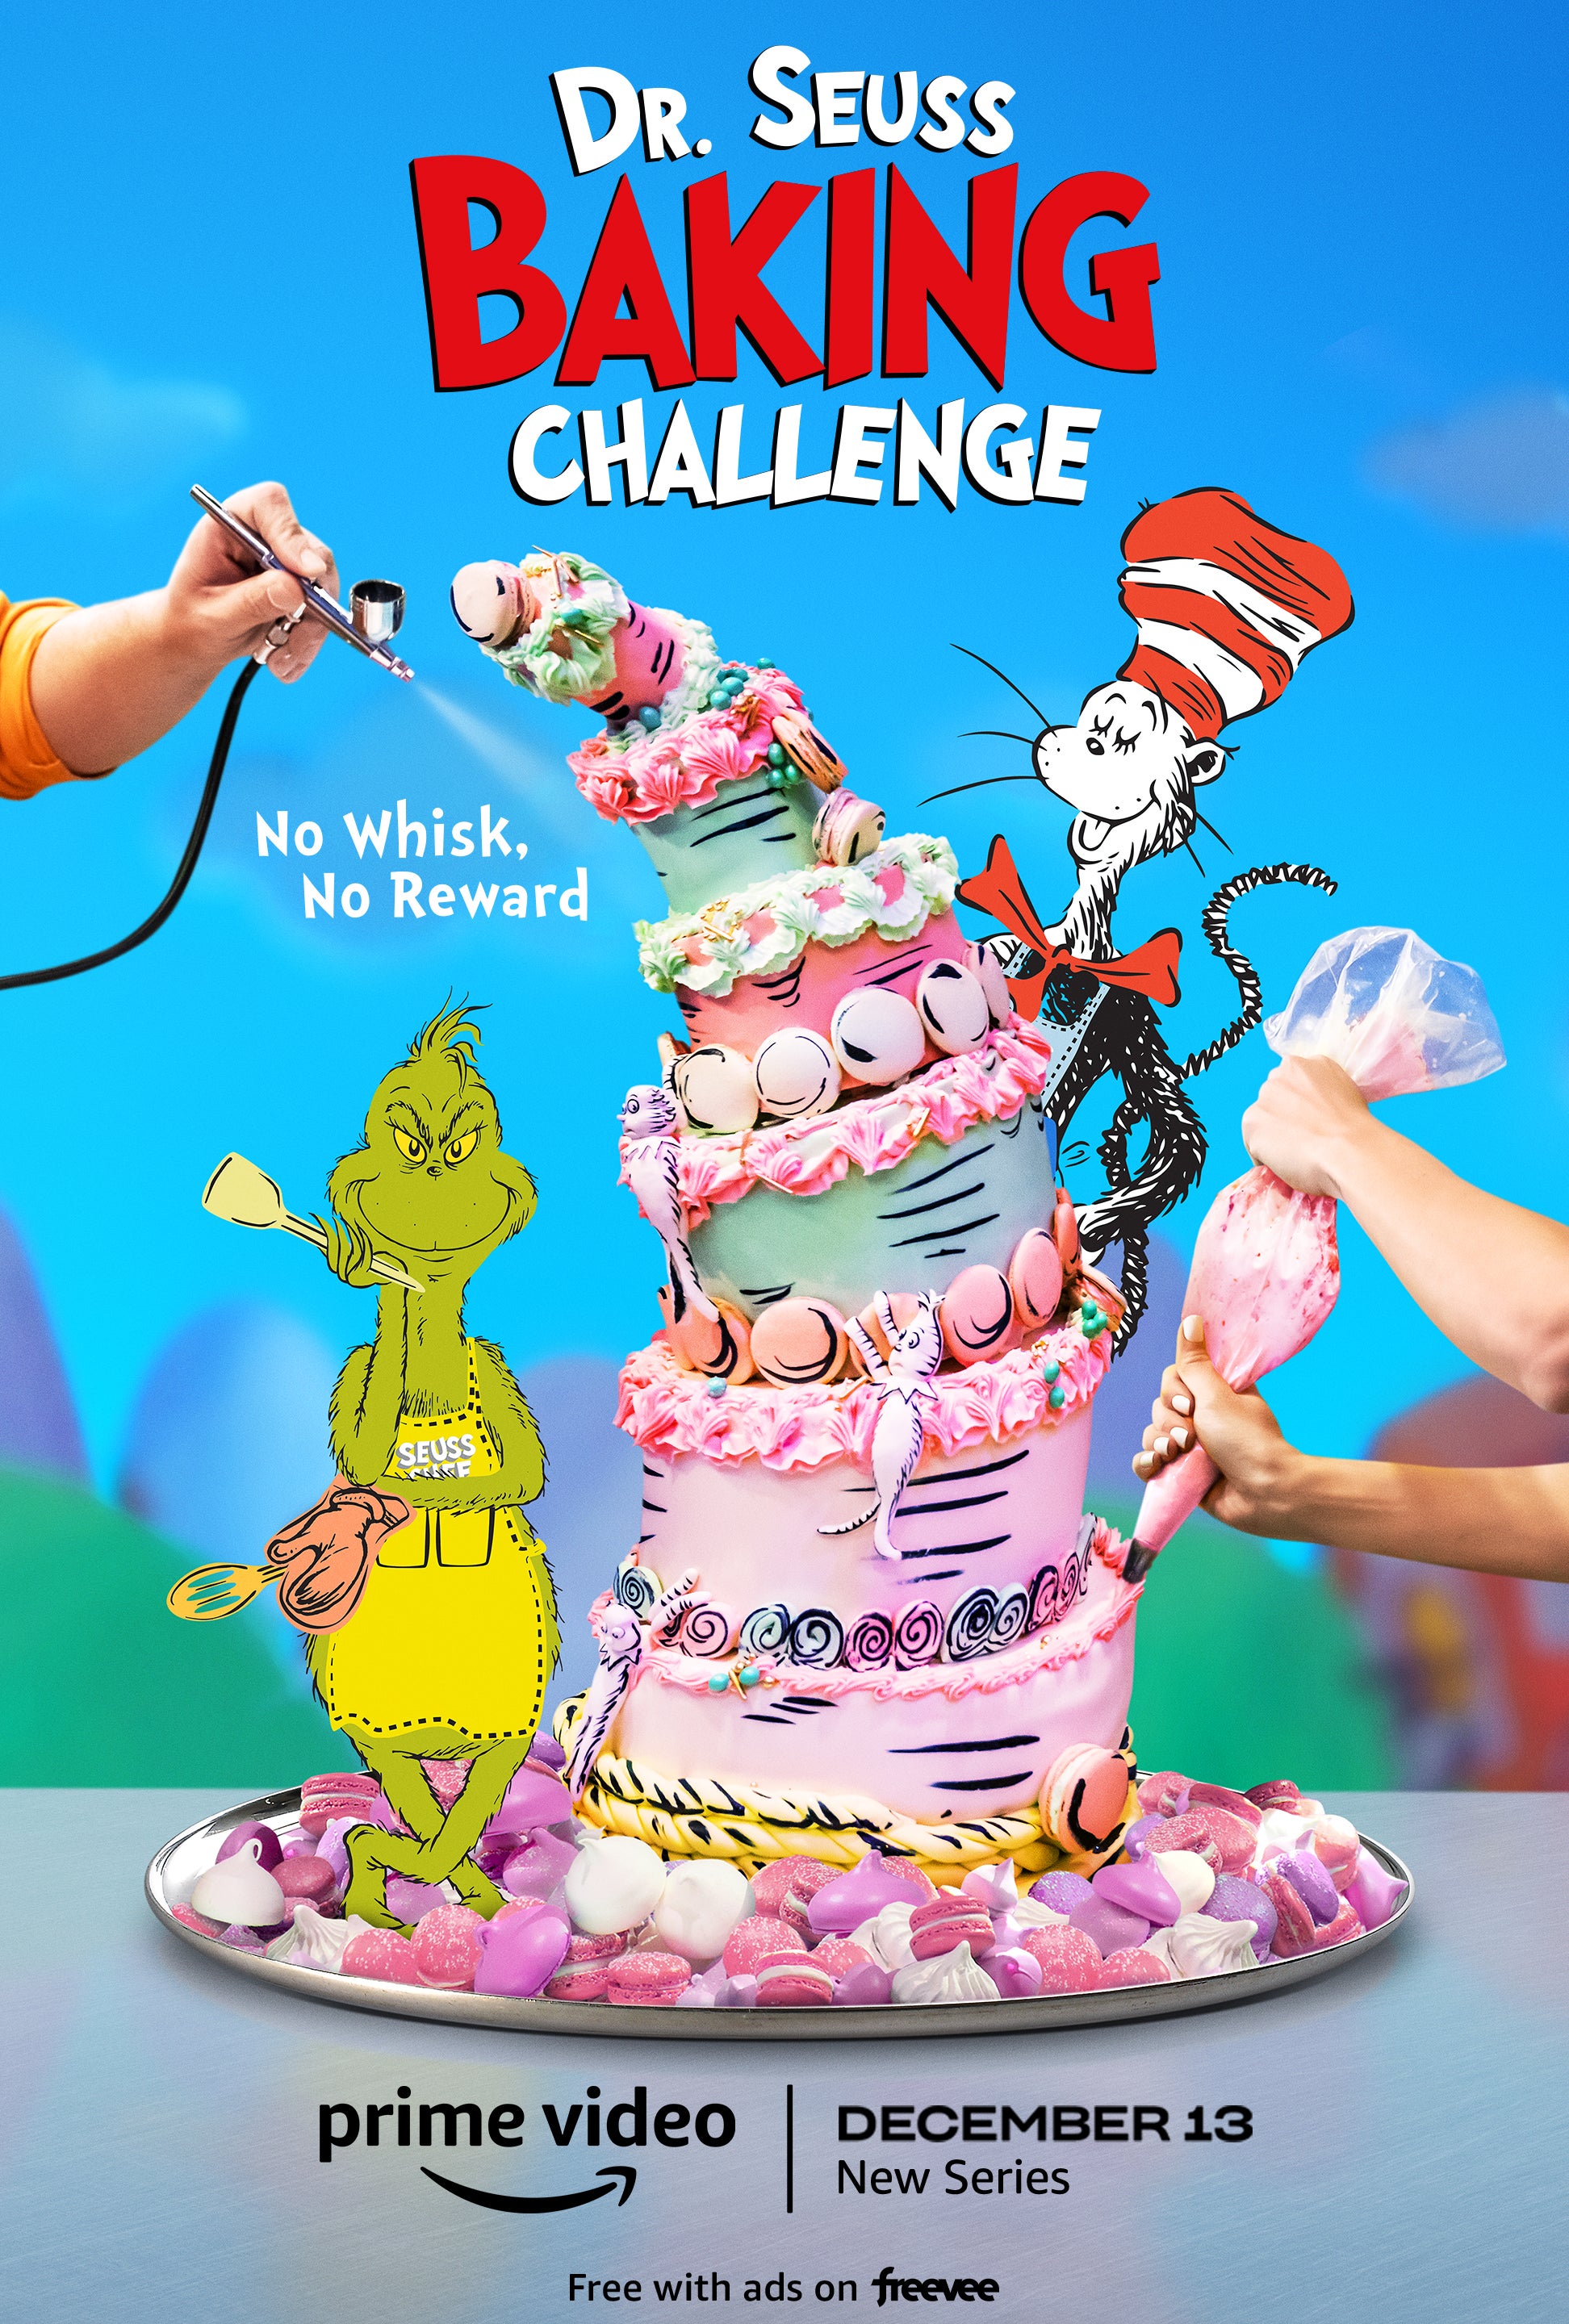 TV ratings for Dr. Seuss Baking Challenge in Tailandia. Amazon Prime Video TV series